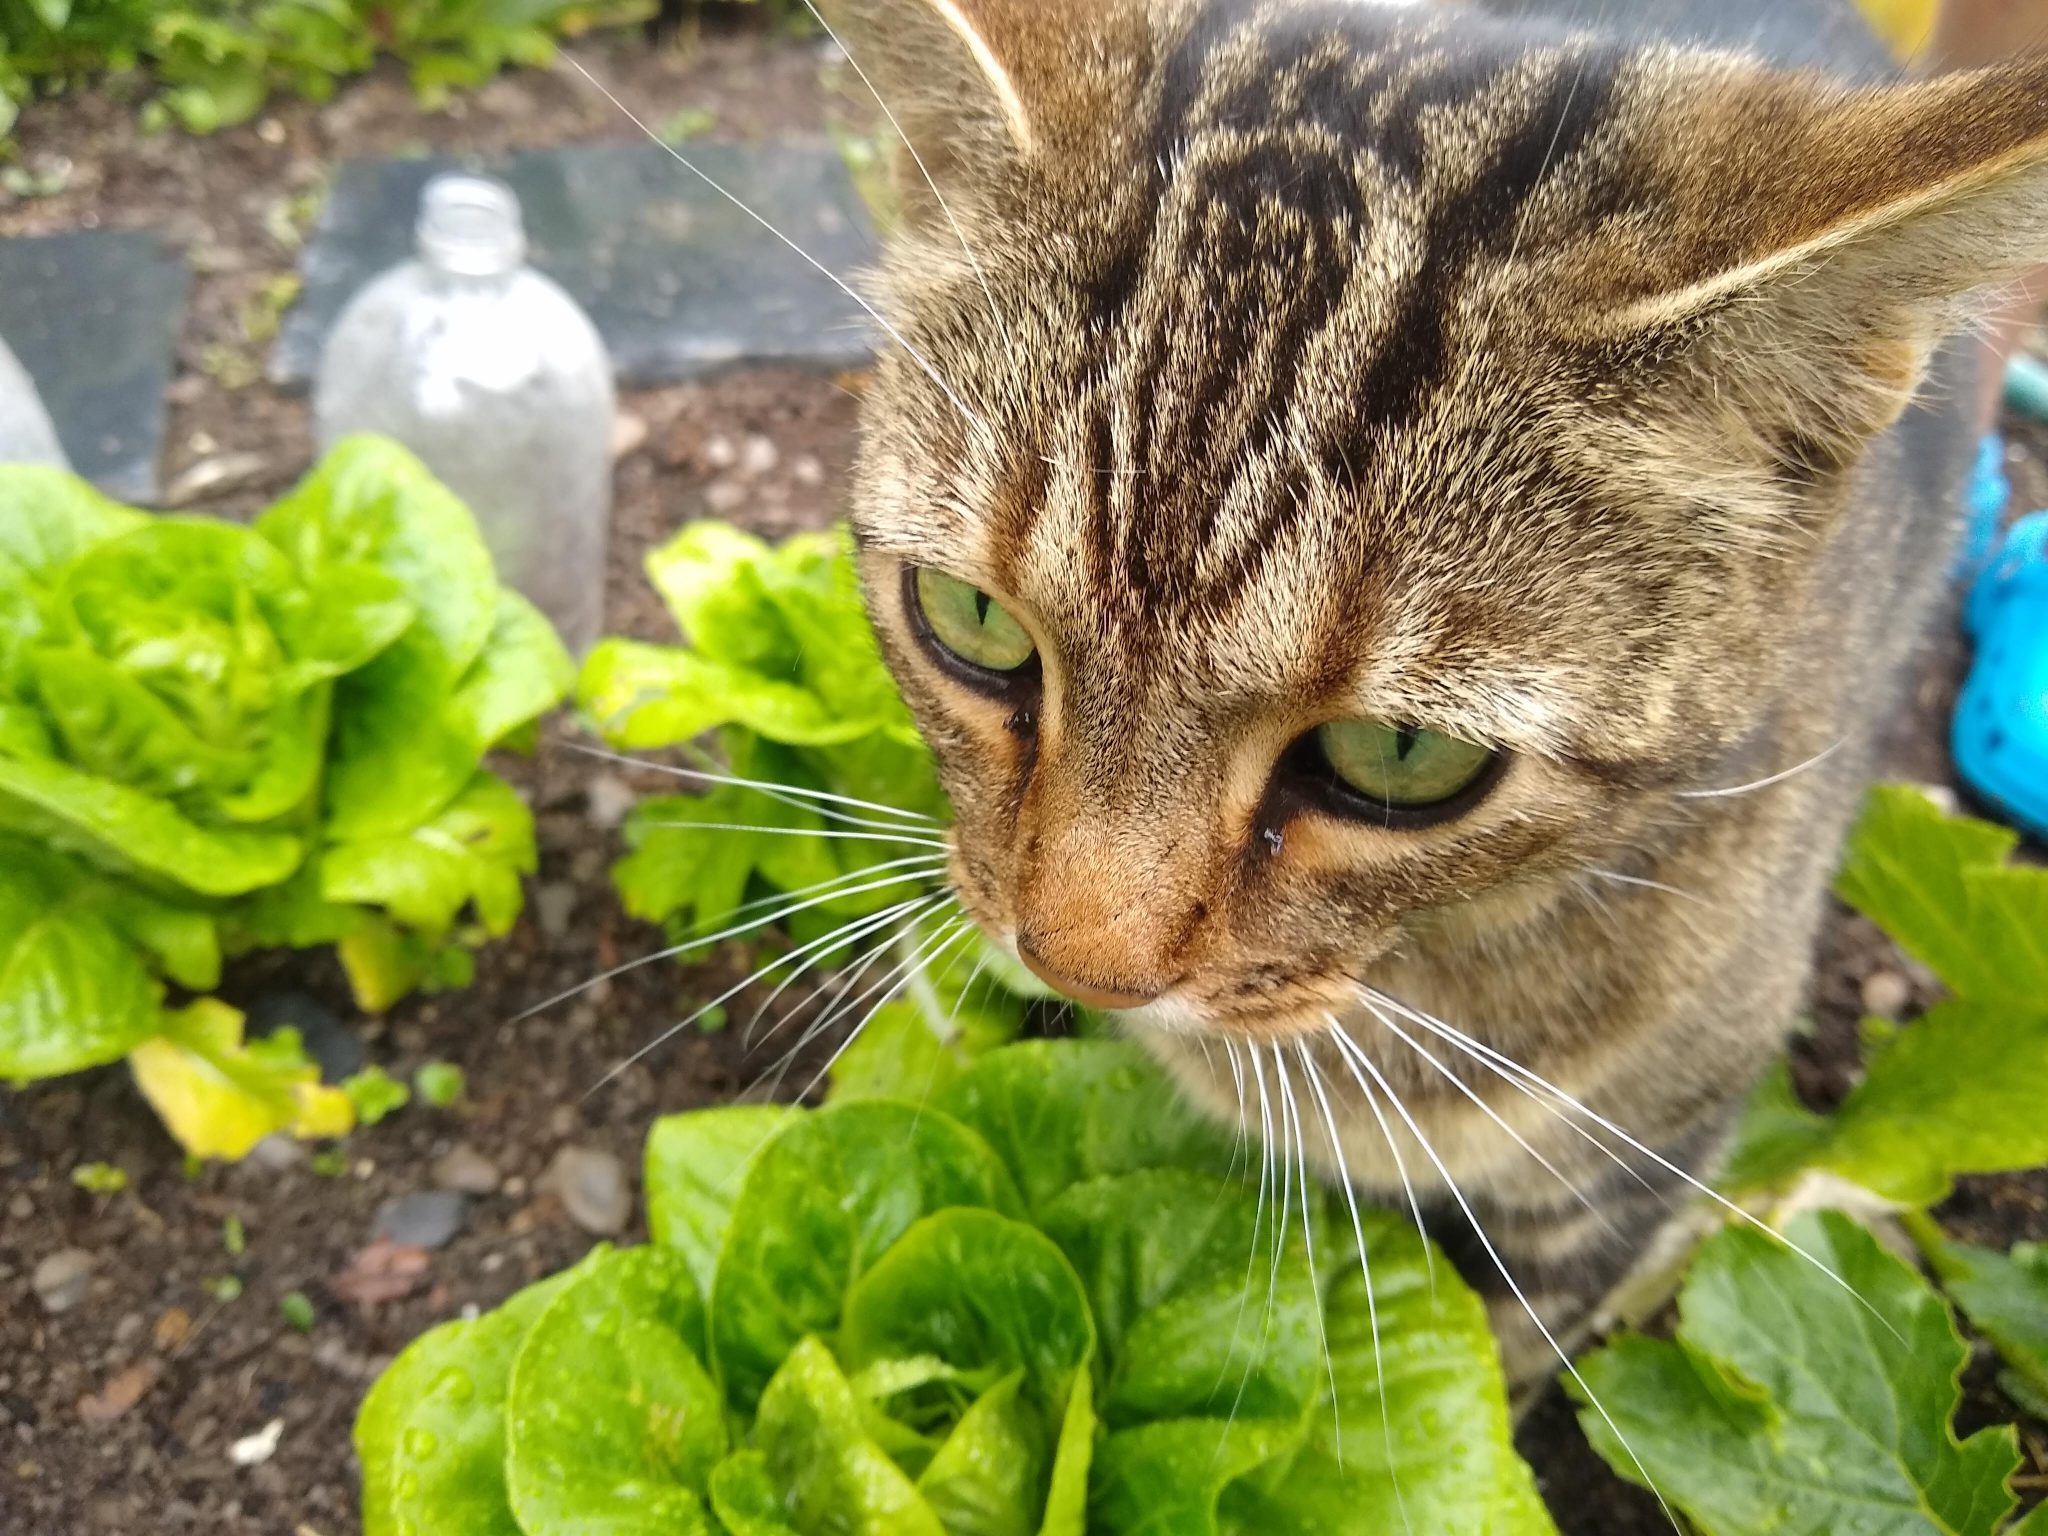 Bob helping in the veggie patch